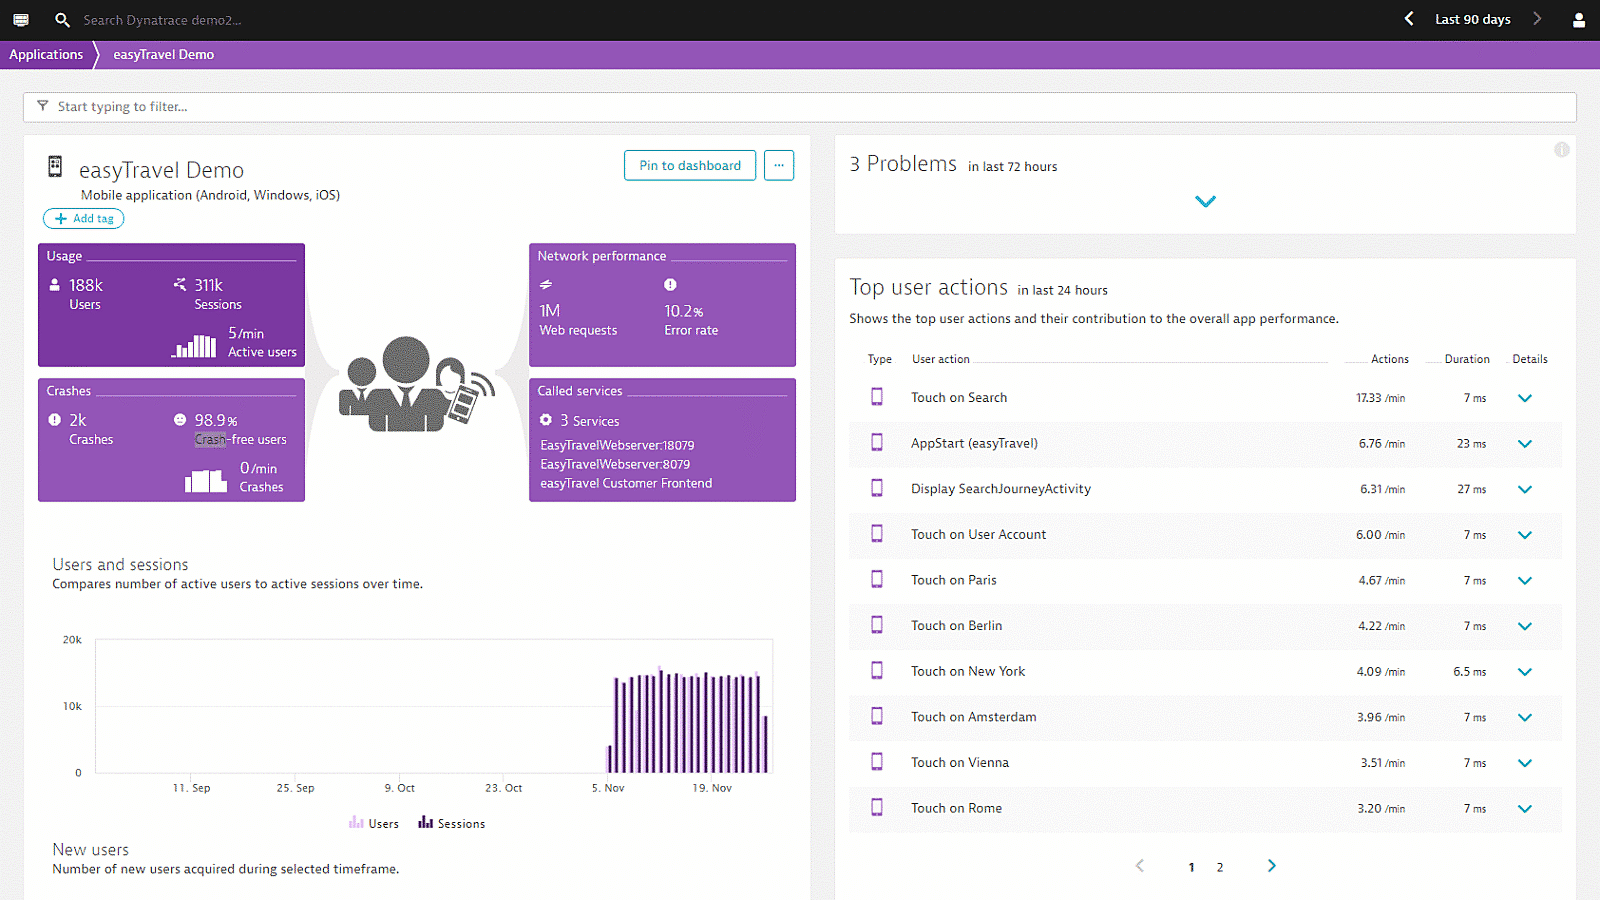 RUM dashboard overview